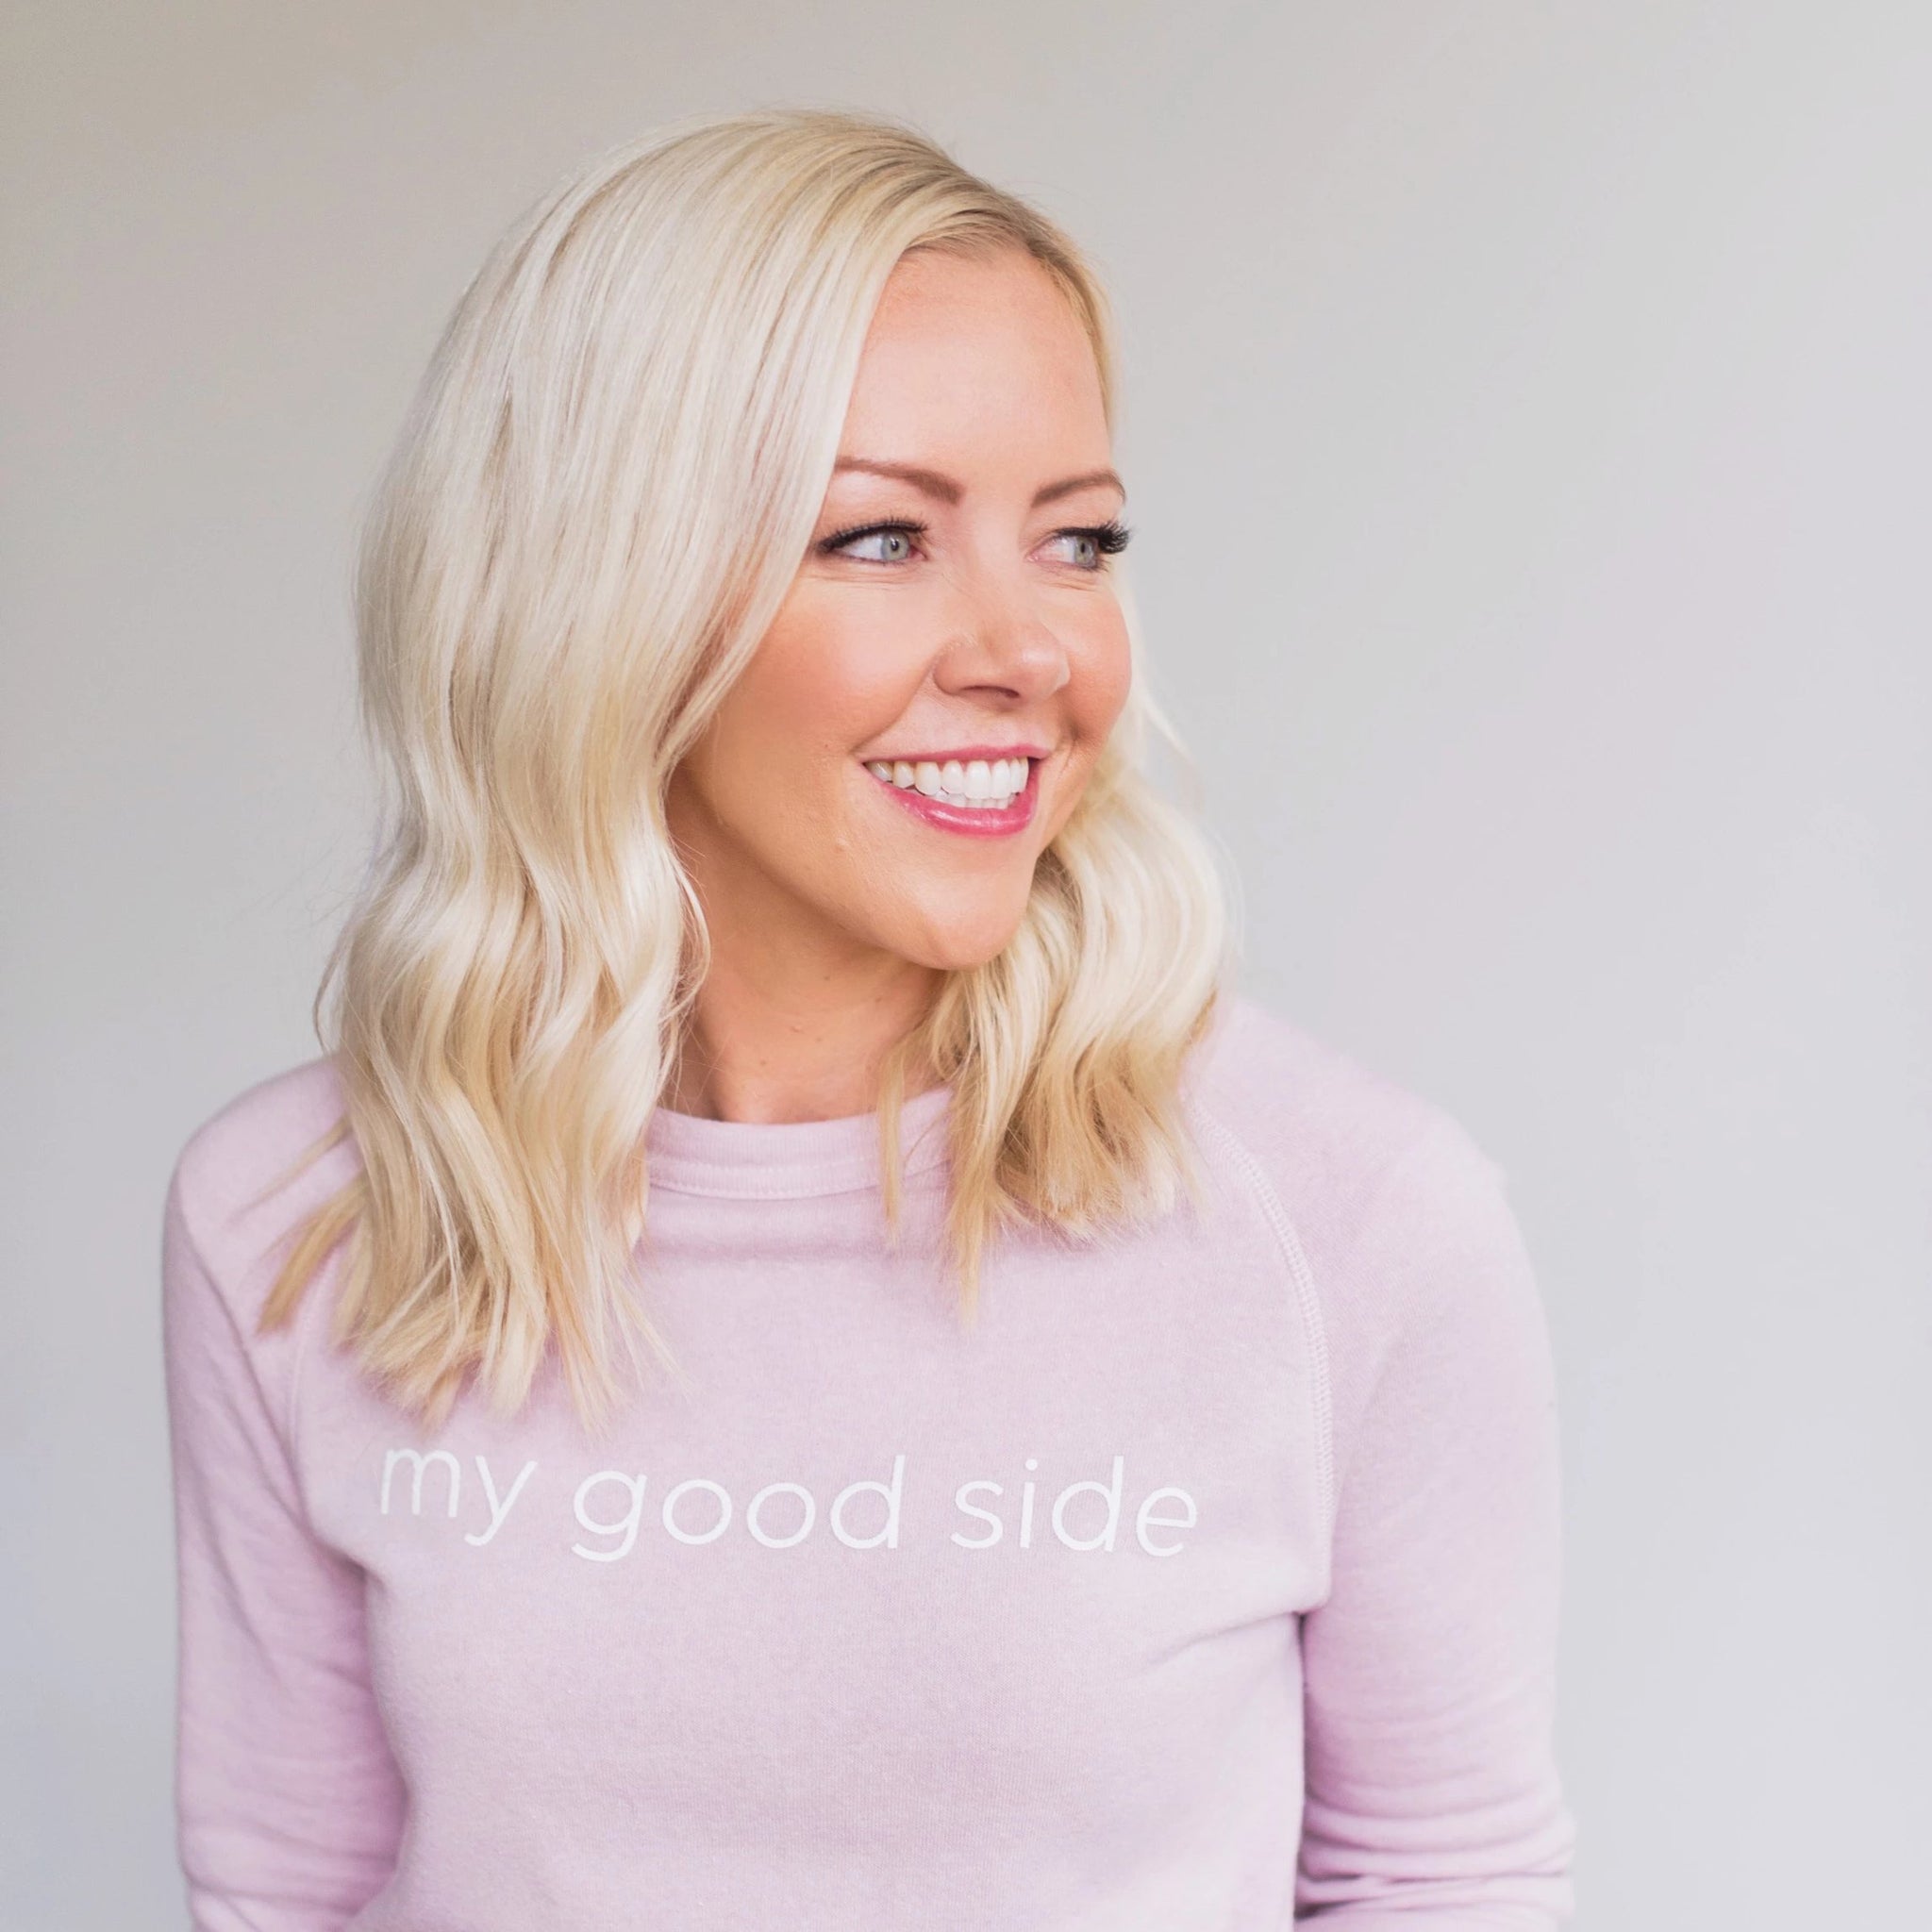 Courtney smiling to the side, wearing her light pink sweatshirt that says the words 'my good side' that can be purchased on the website